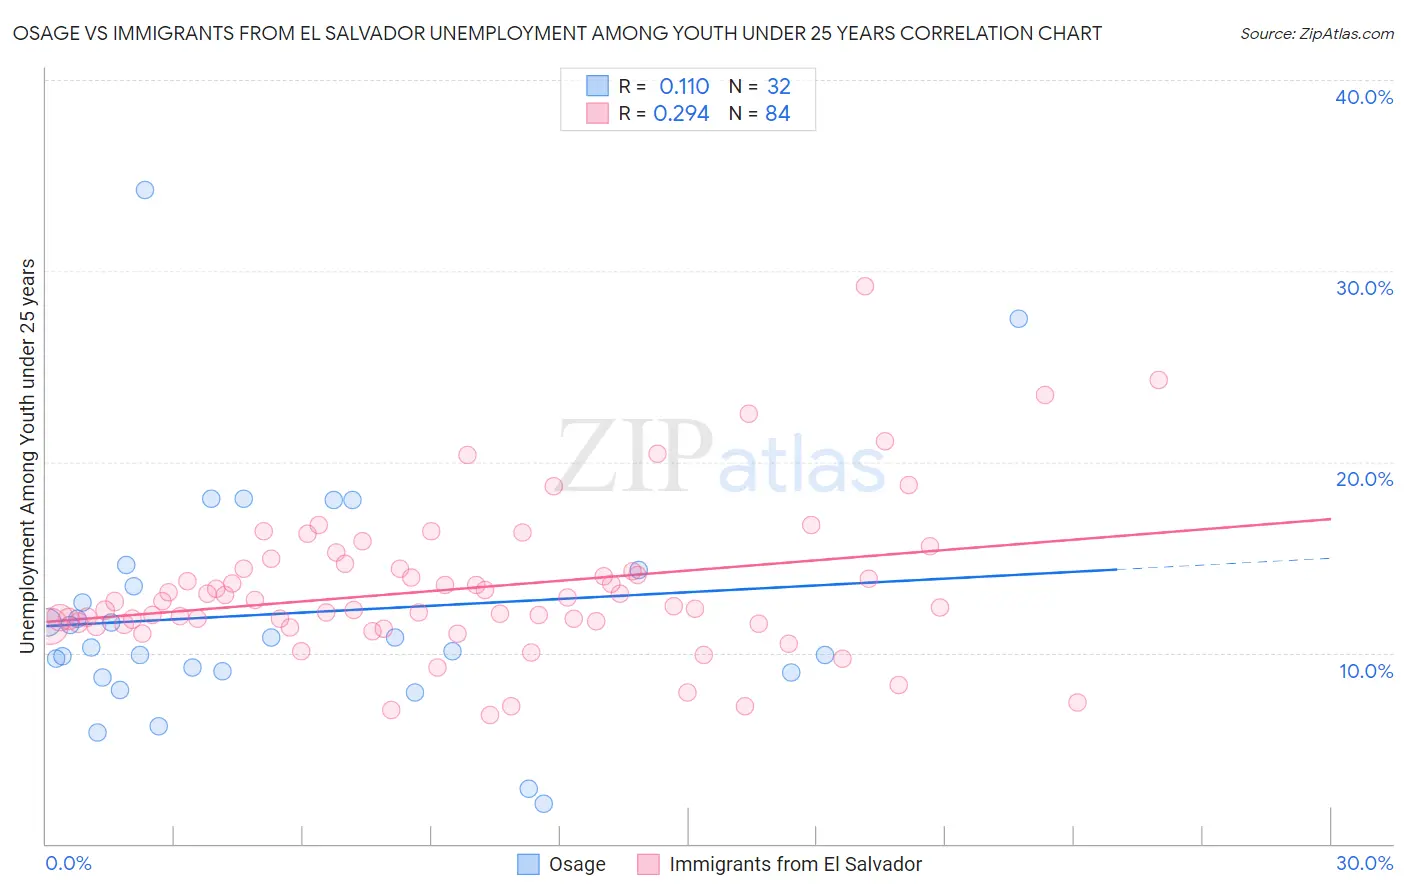 Osage vs Immigrants from El Salvador Unemployment Among Youth under 25 years